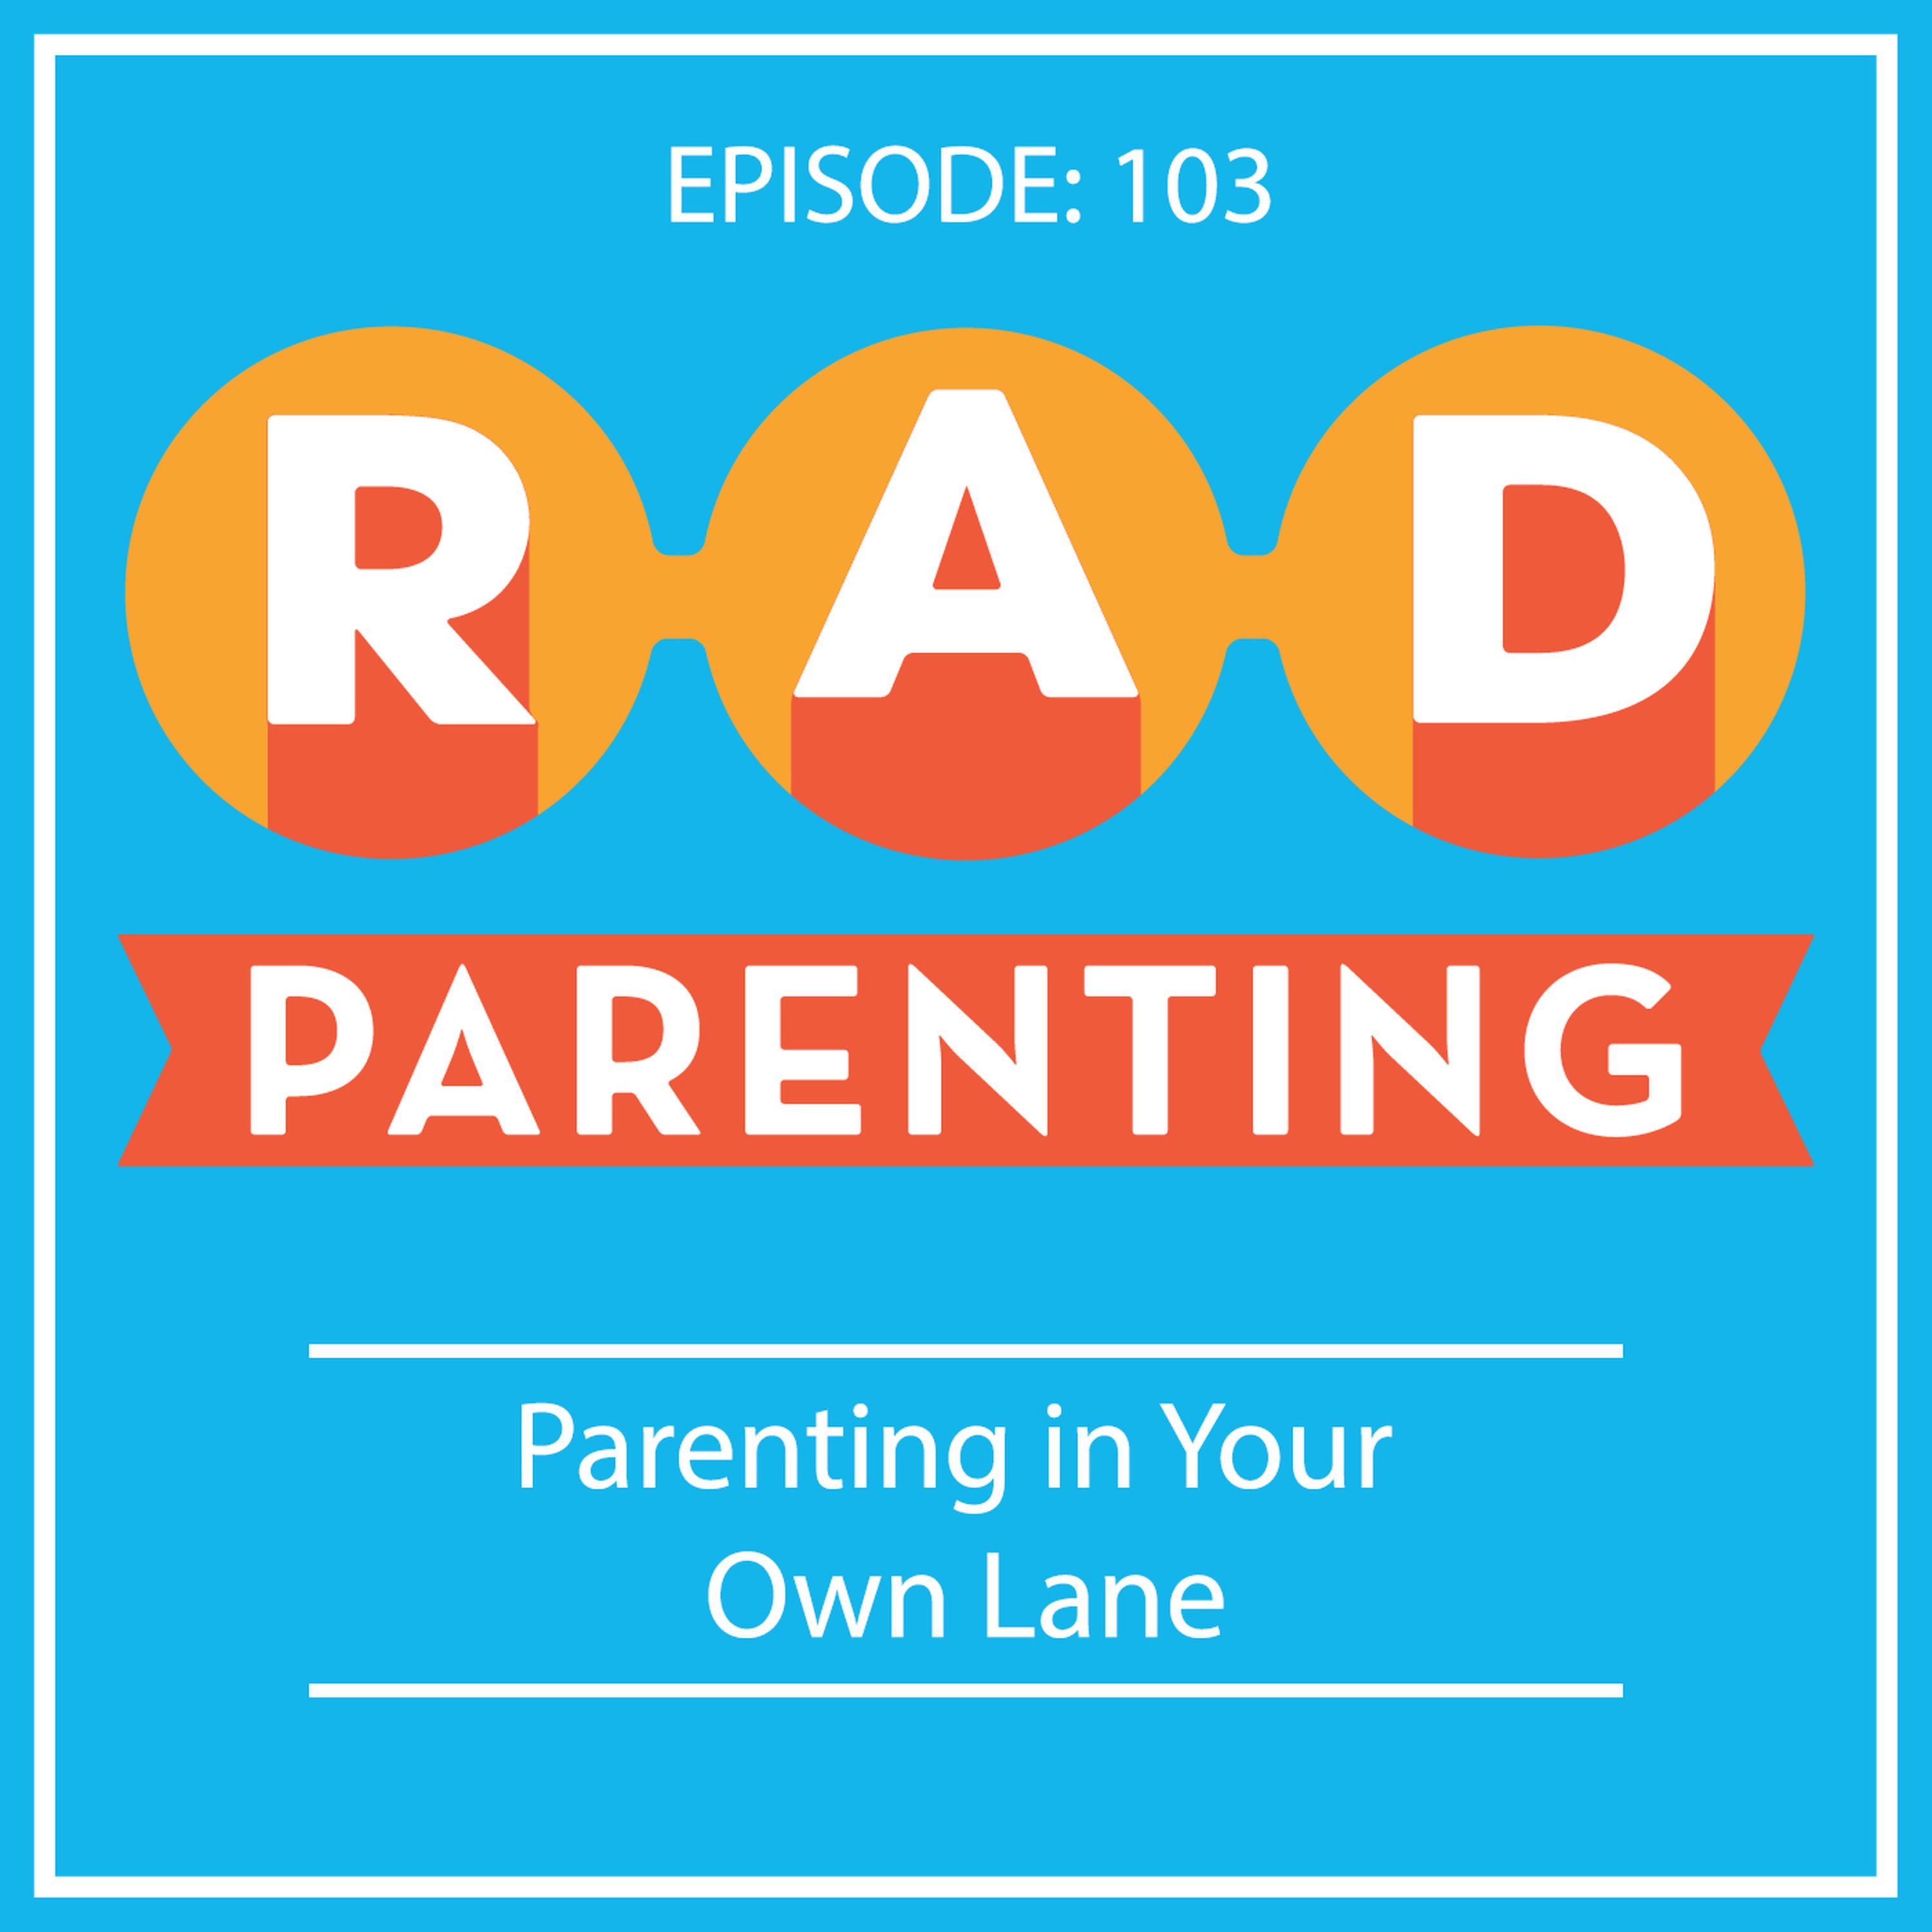 Parenting in Your Own Lane